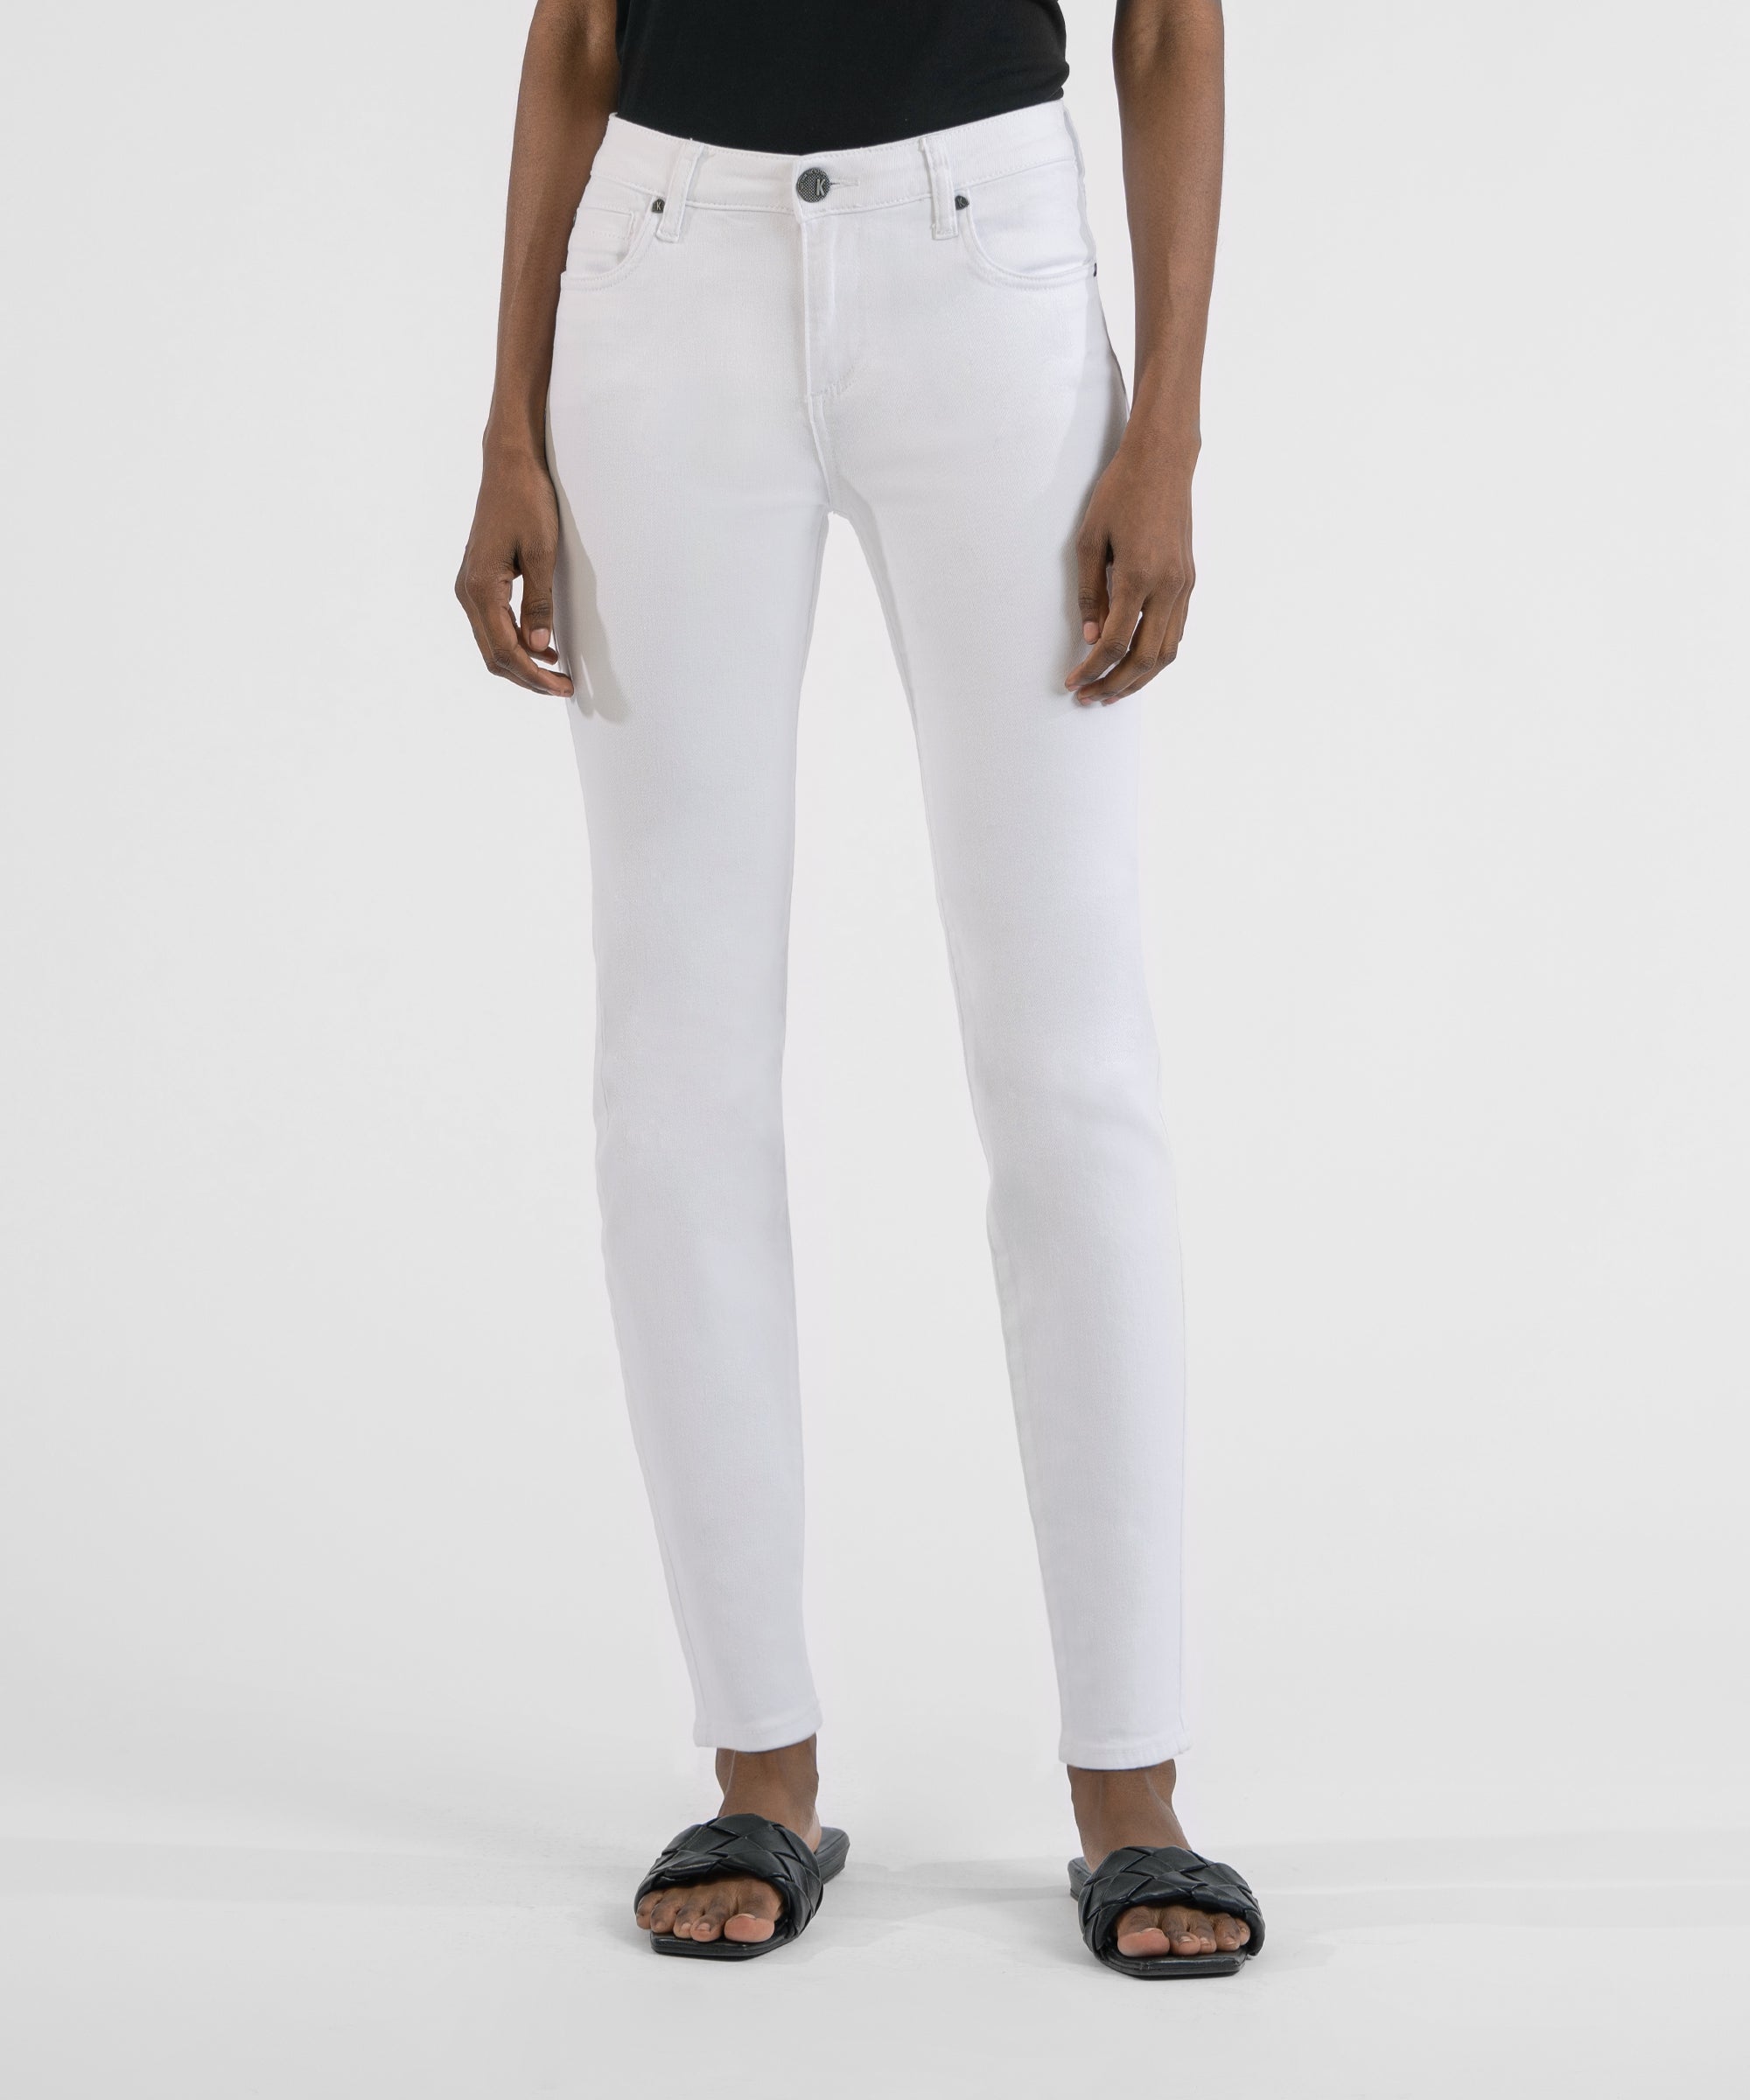 Diana Mid Rise Relaxed Fit Skinny, Exclusive (White) - Kut from the Kloth